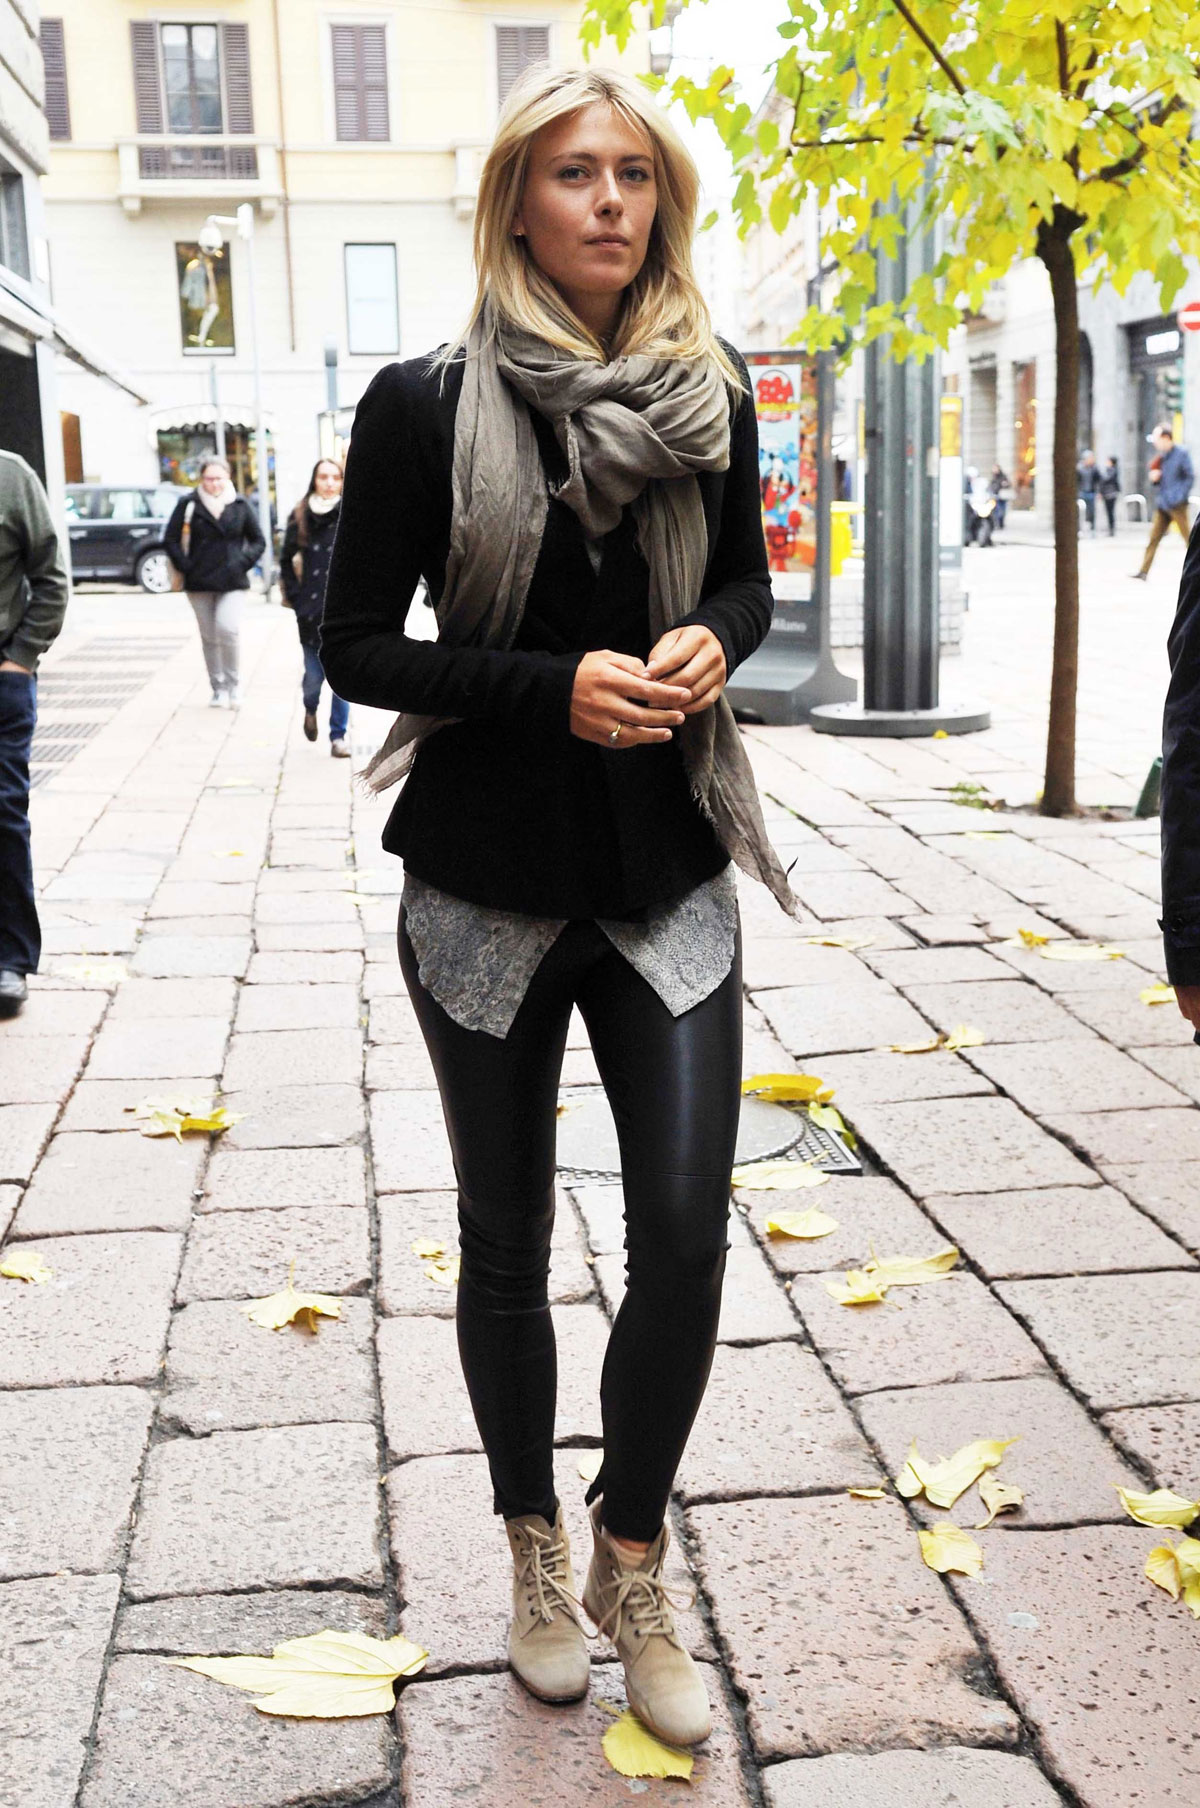 MARIA-SHARAPOVA-in-Leather-Pants-Out-and-About-in-Milan-2.jpg